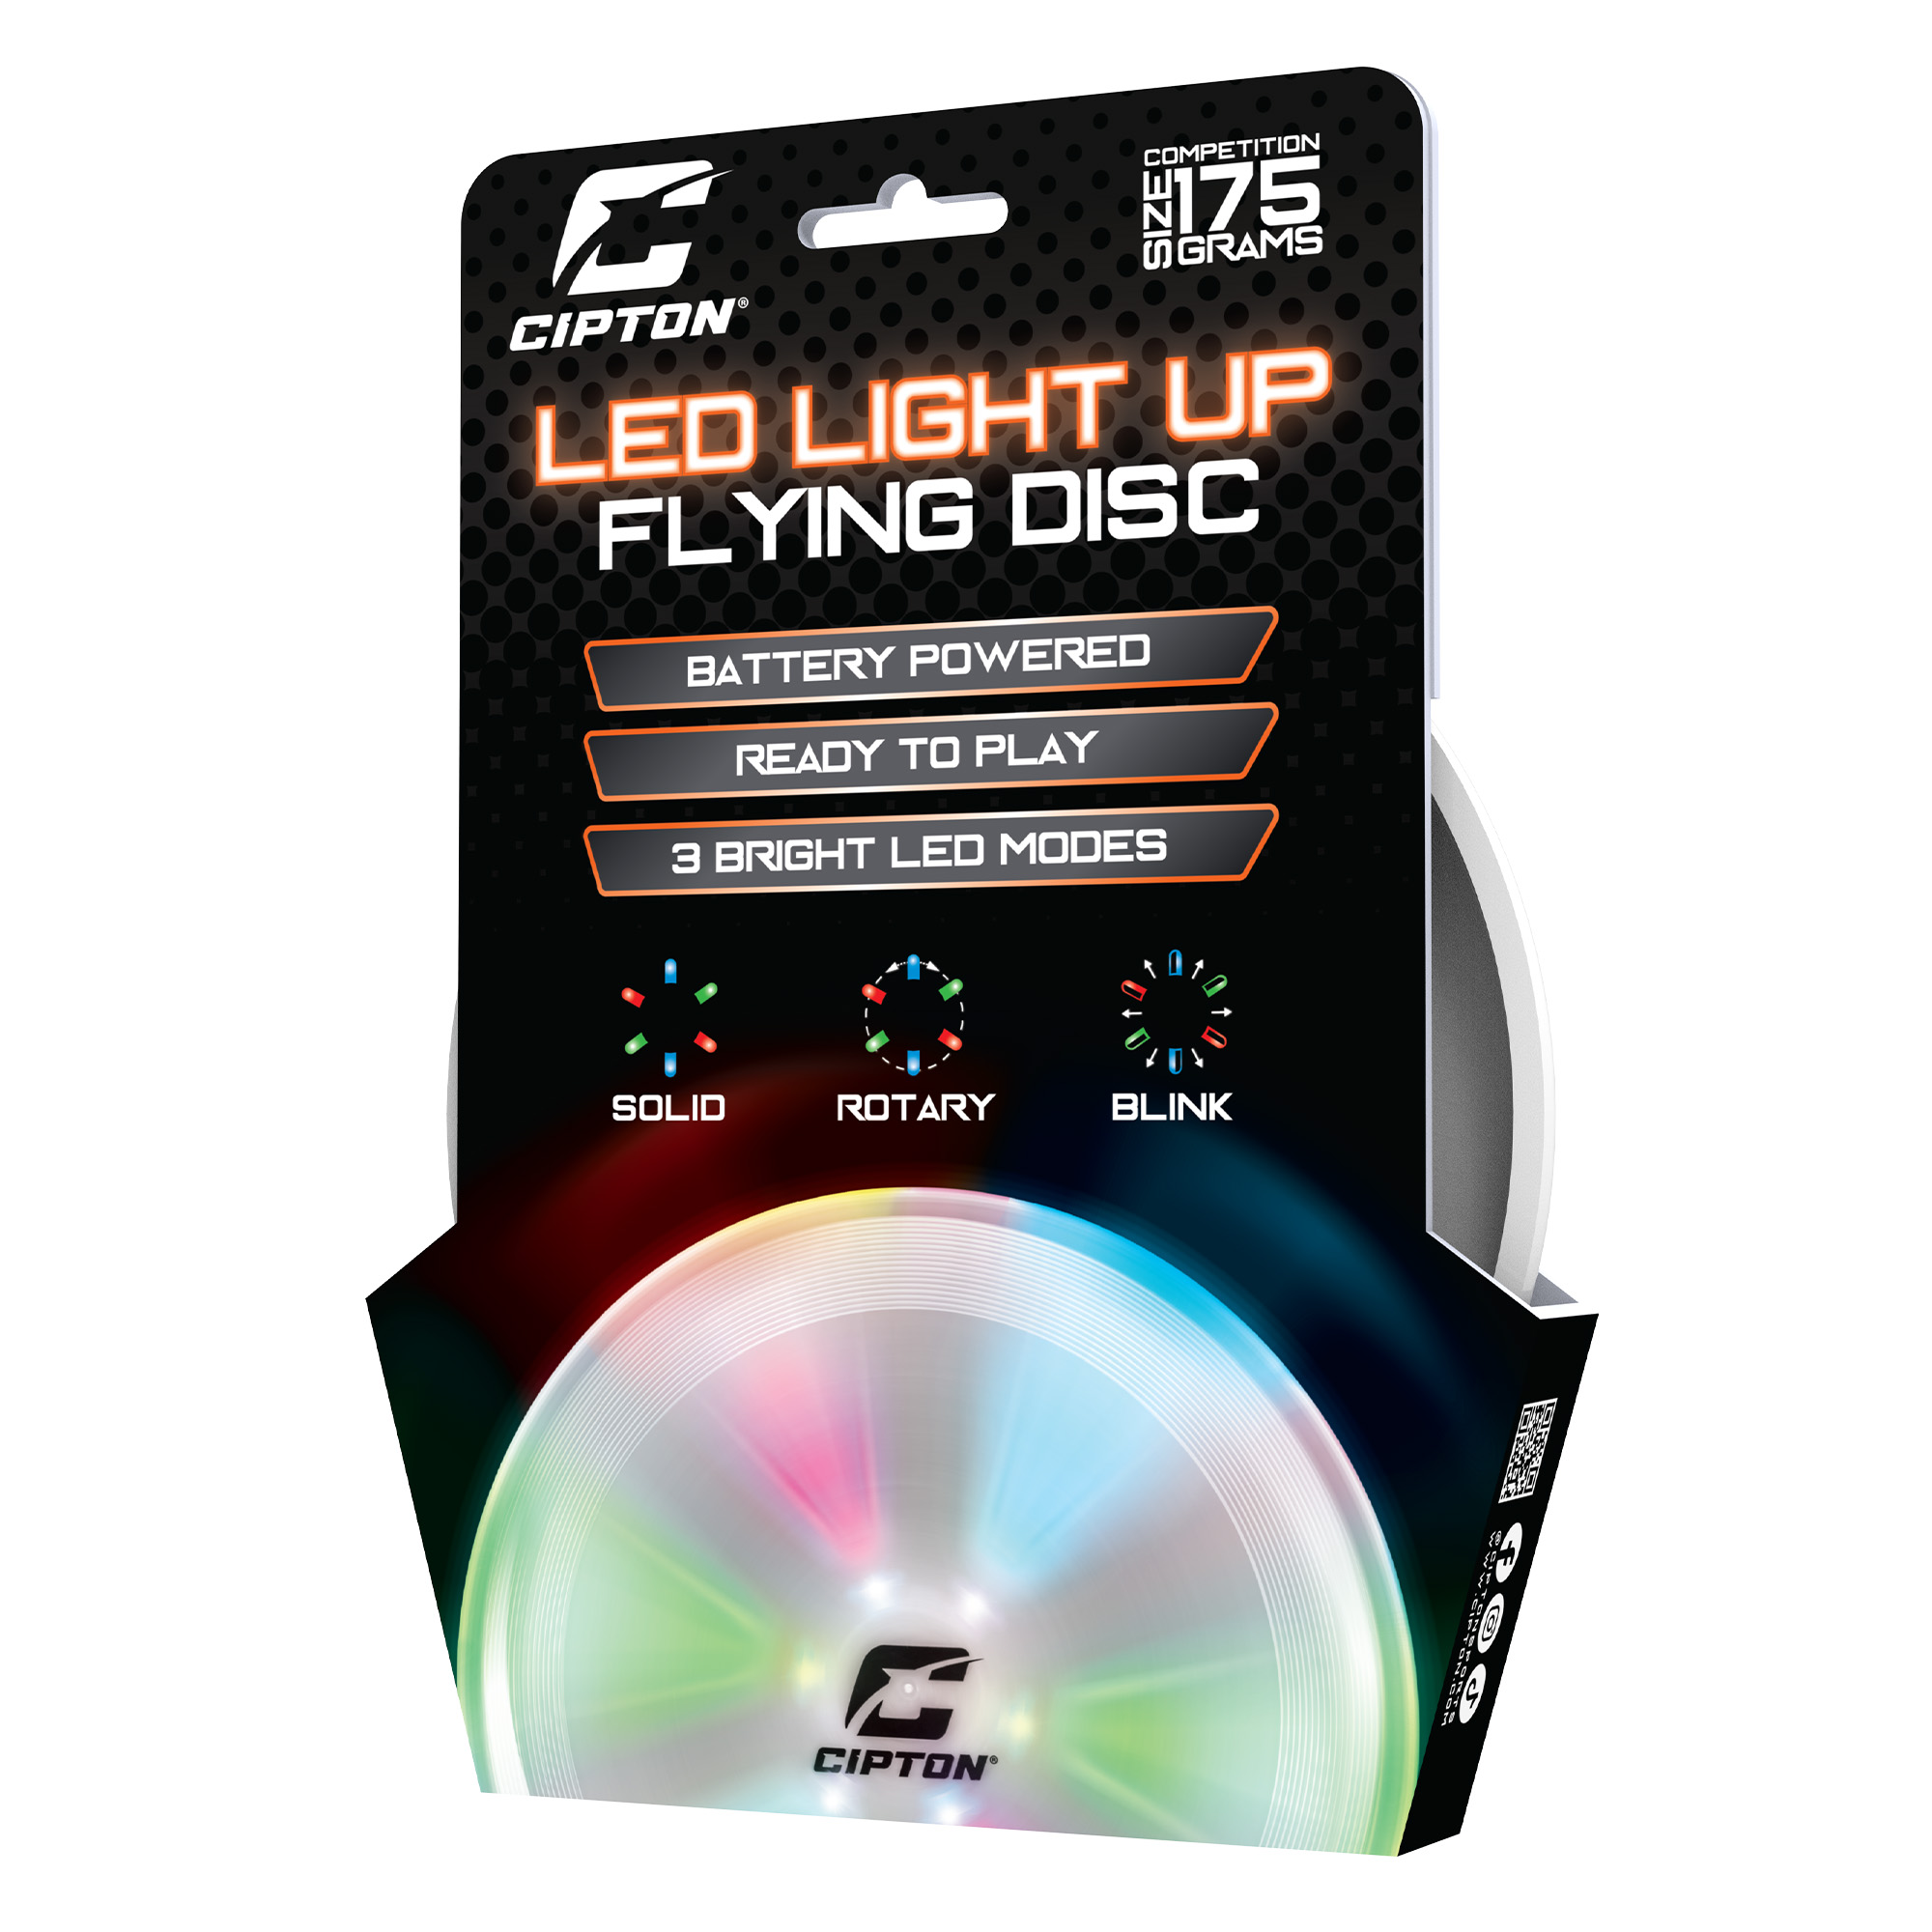 CIPTON Light up Flying Disc - Solid, Rotary, and Blinking LED Light Frisbee Modes - 9.5 inch - image 3 of 8